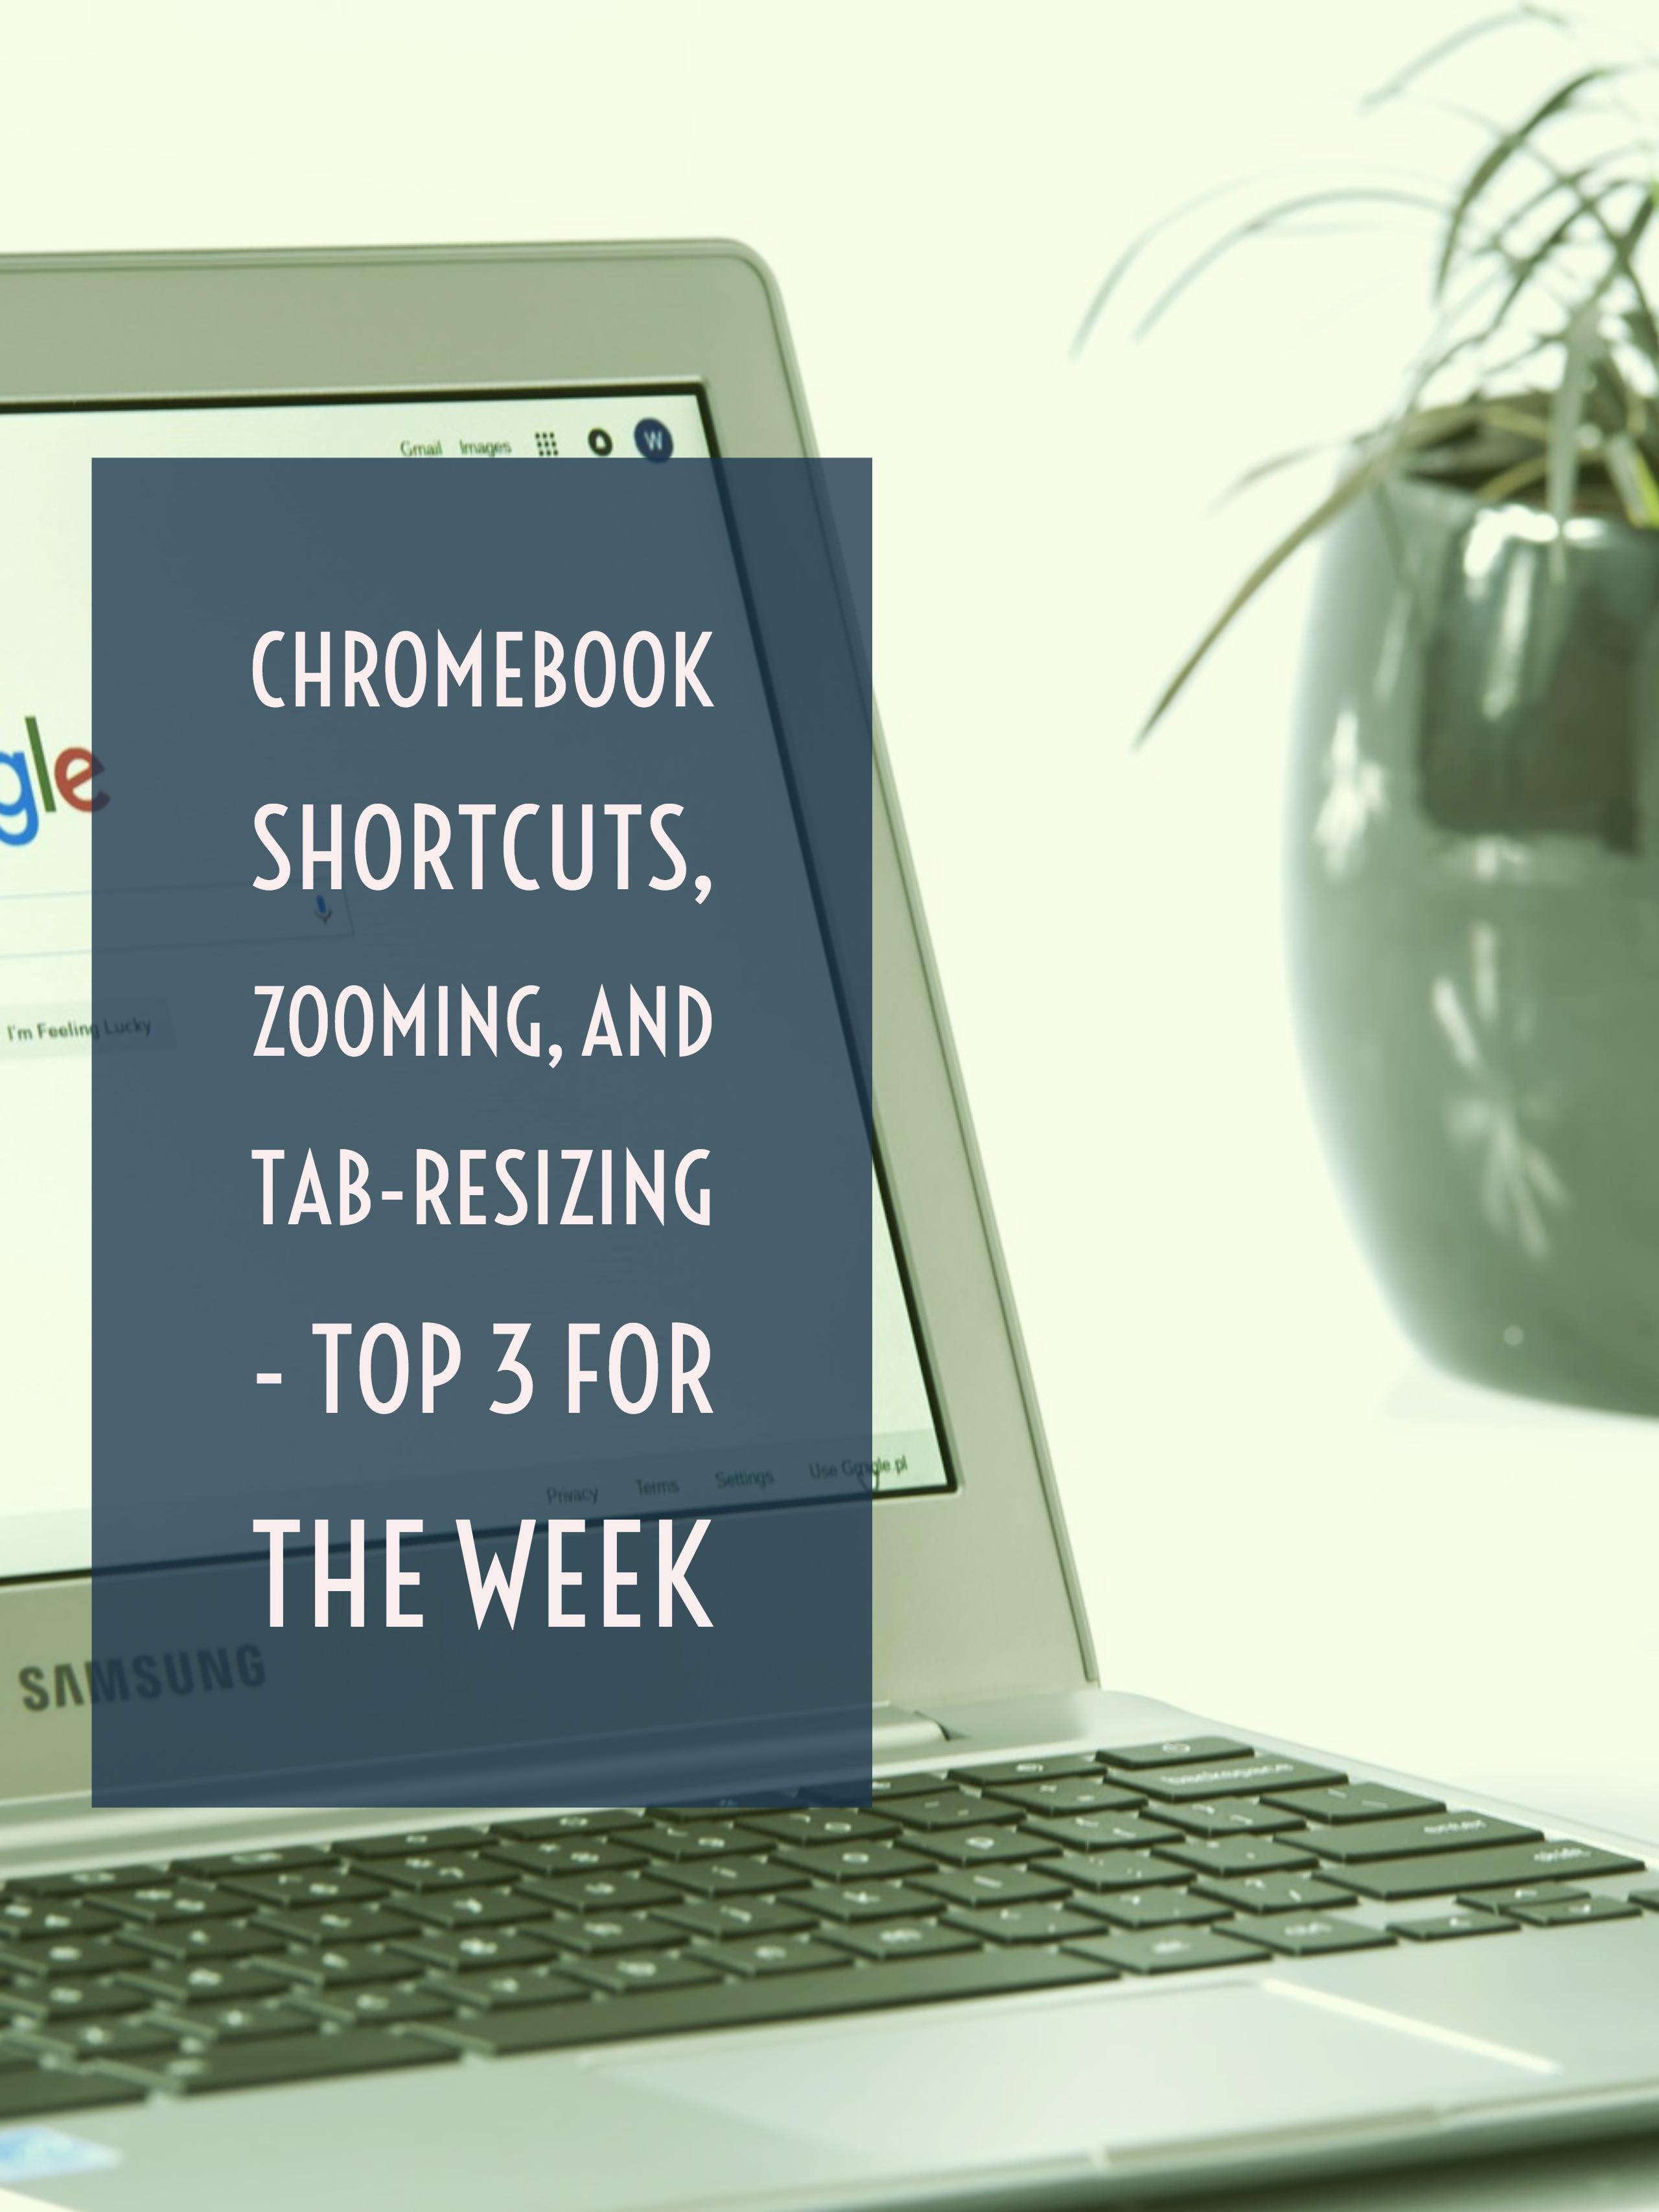 Chromebook shortcuts, zooming, and tab-resizing – Top 3 for the week